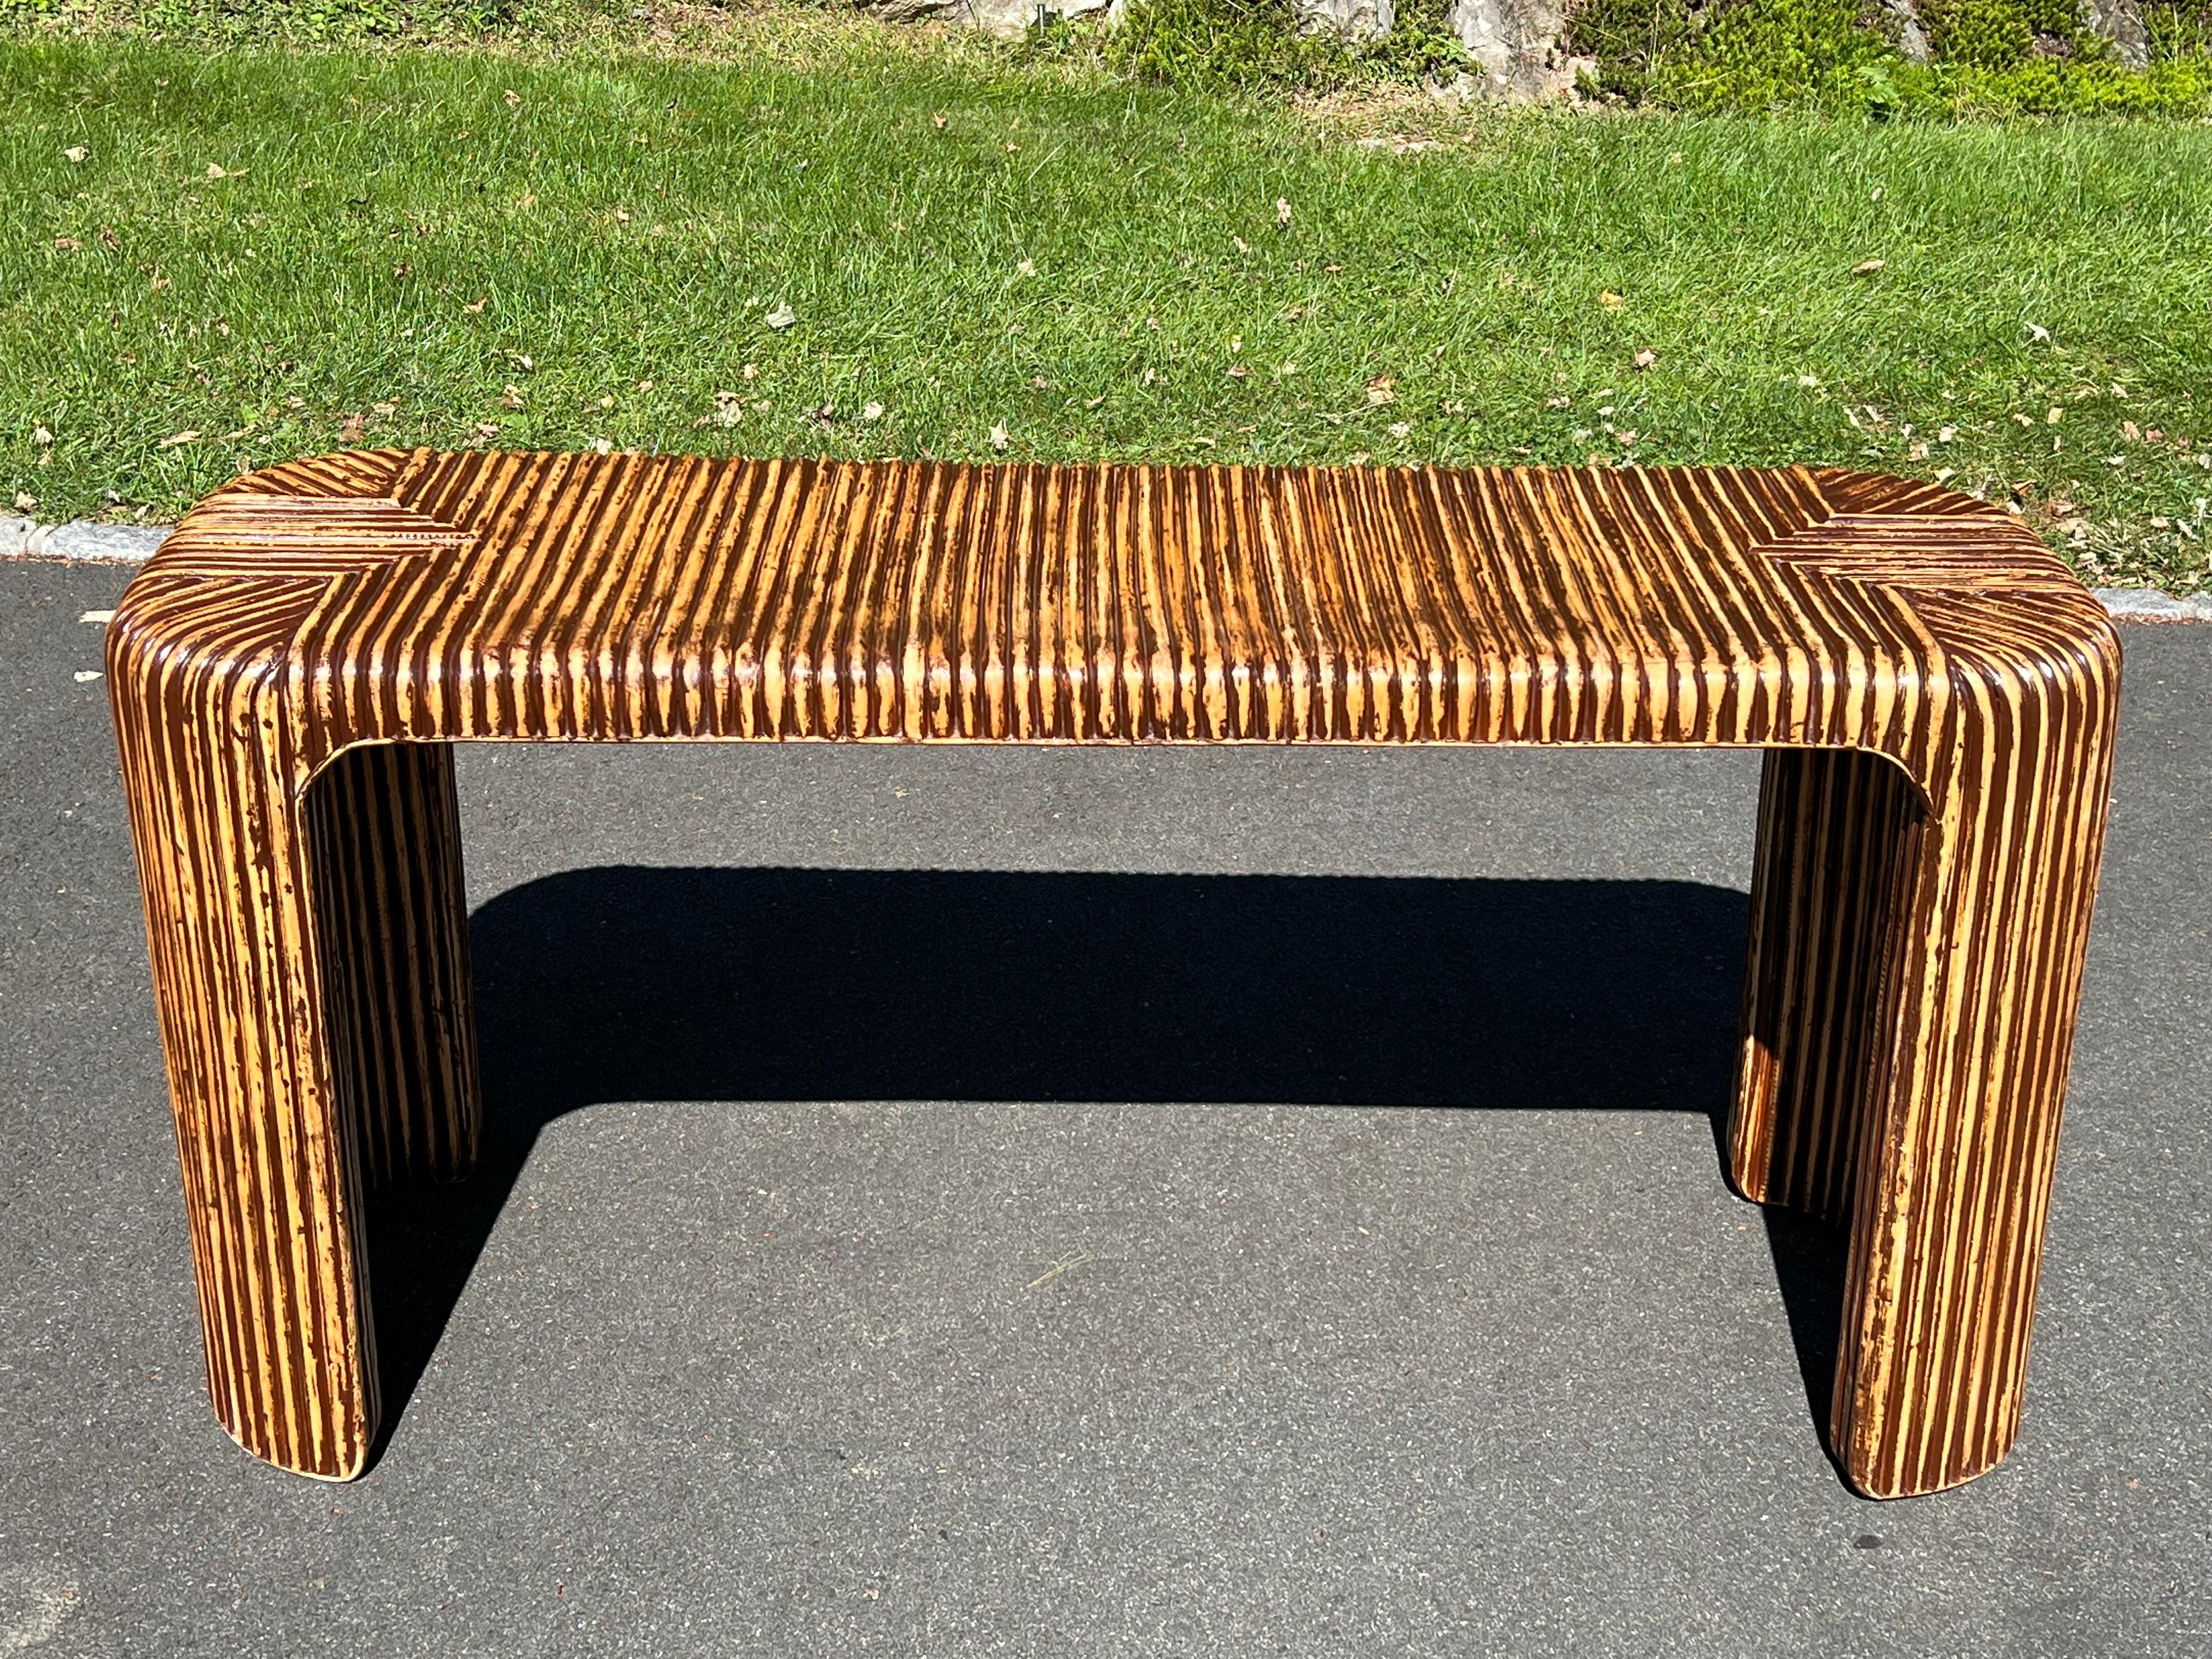 Palm Beach Regency Bamboo Console Table. Amazing two toned textural piece. Perfect to add some pizzazz to that bare entryway or hallway. Ideal for coastal or organic boho style homes. 